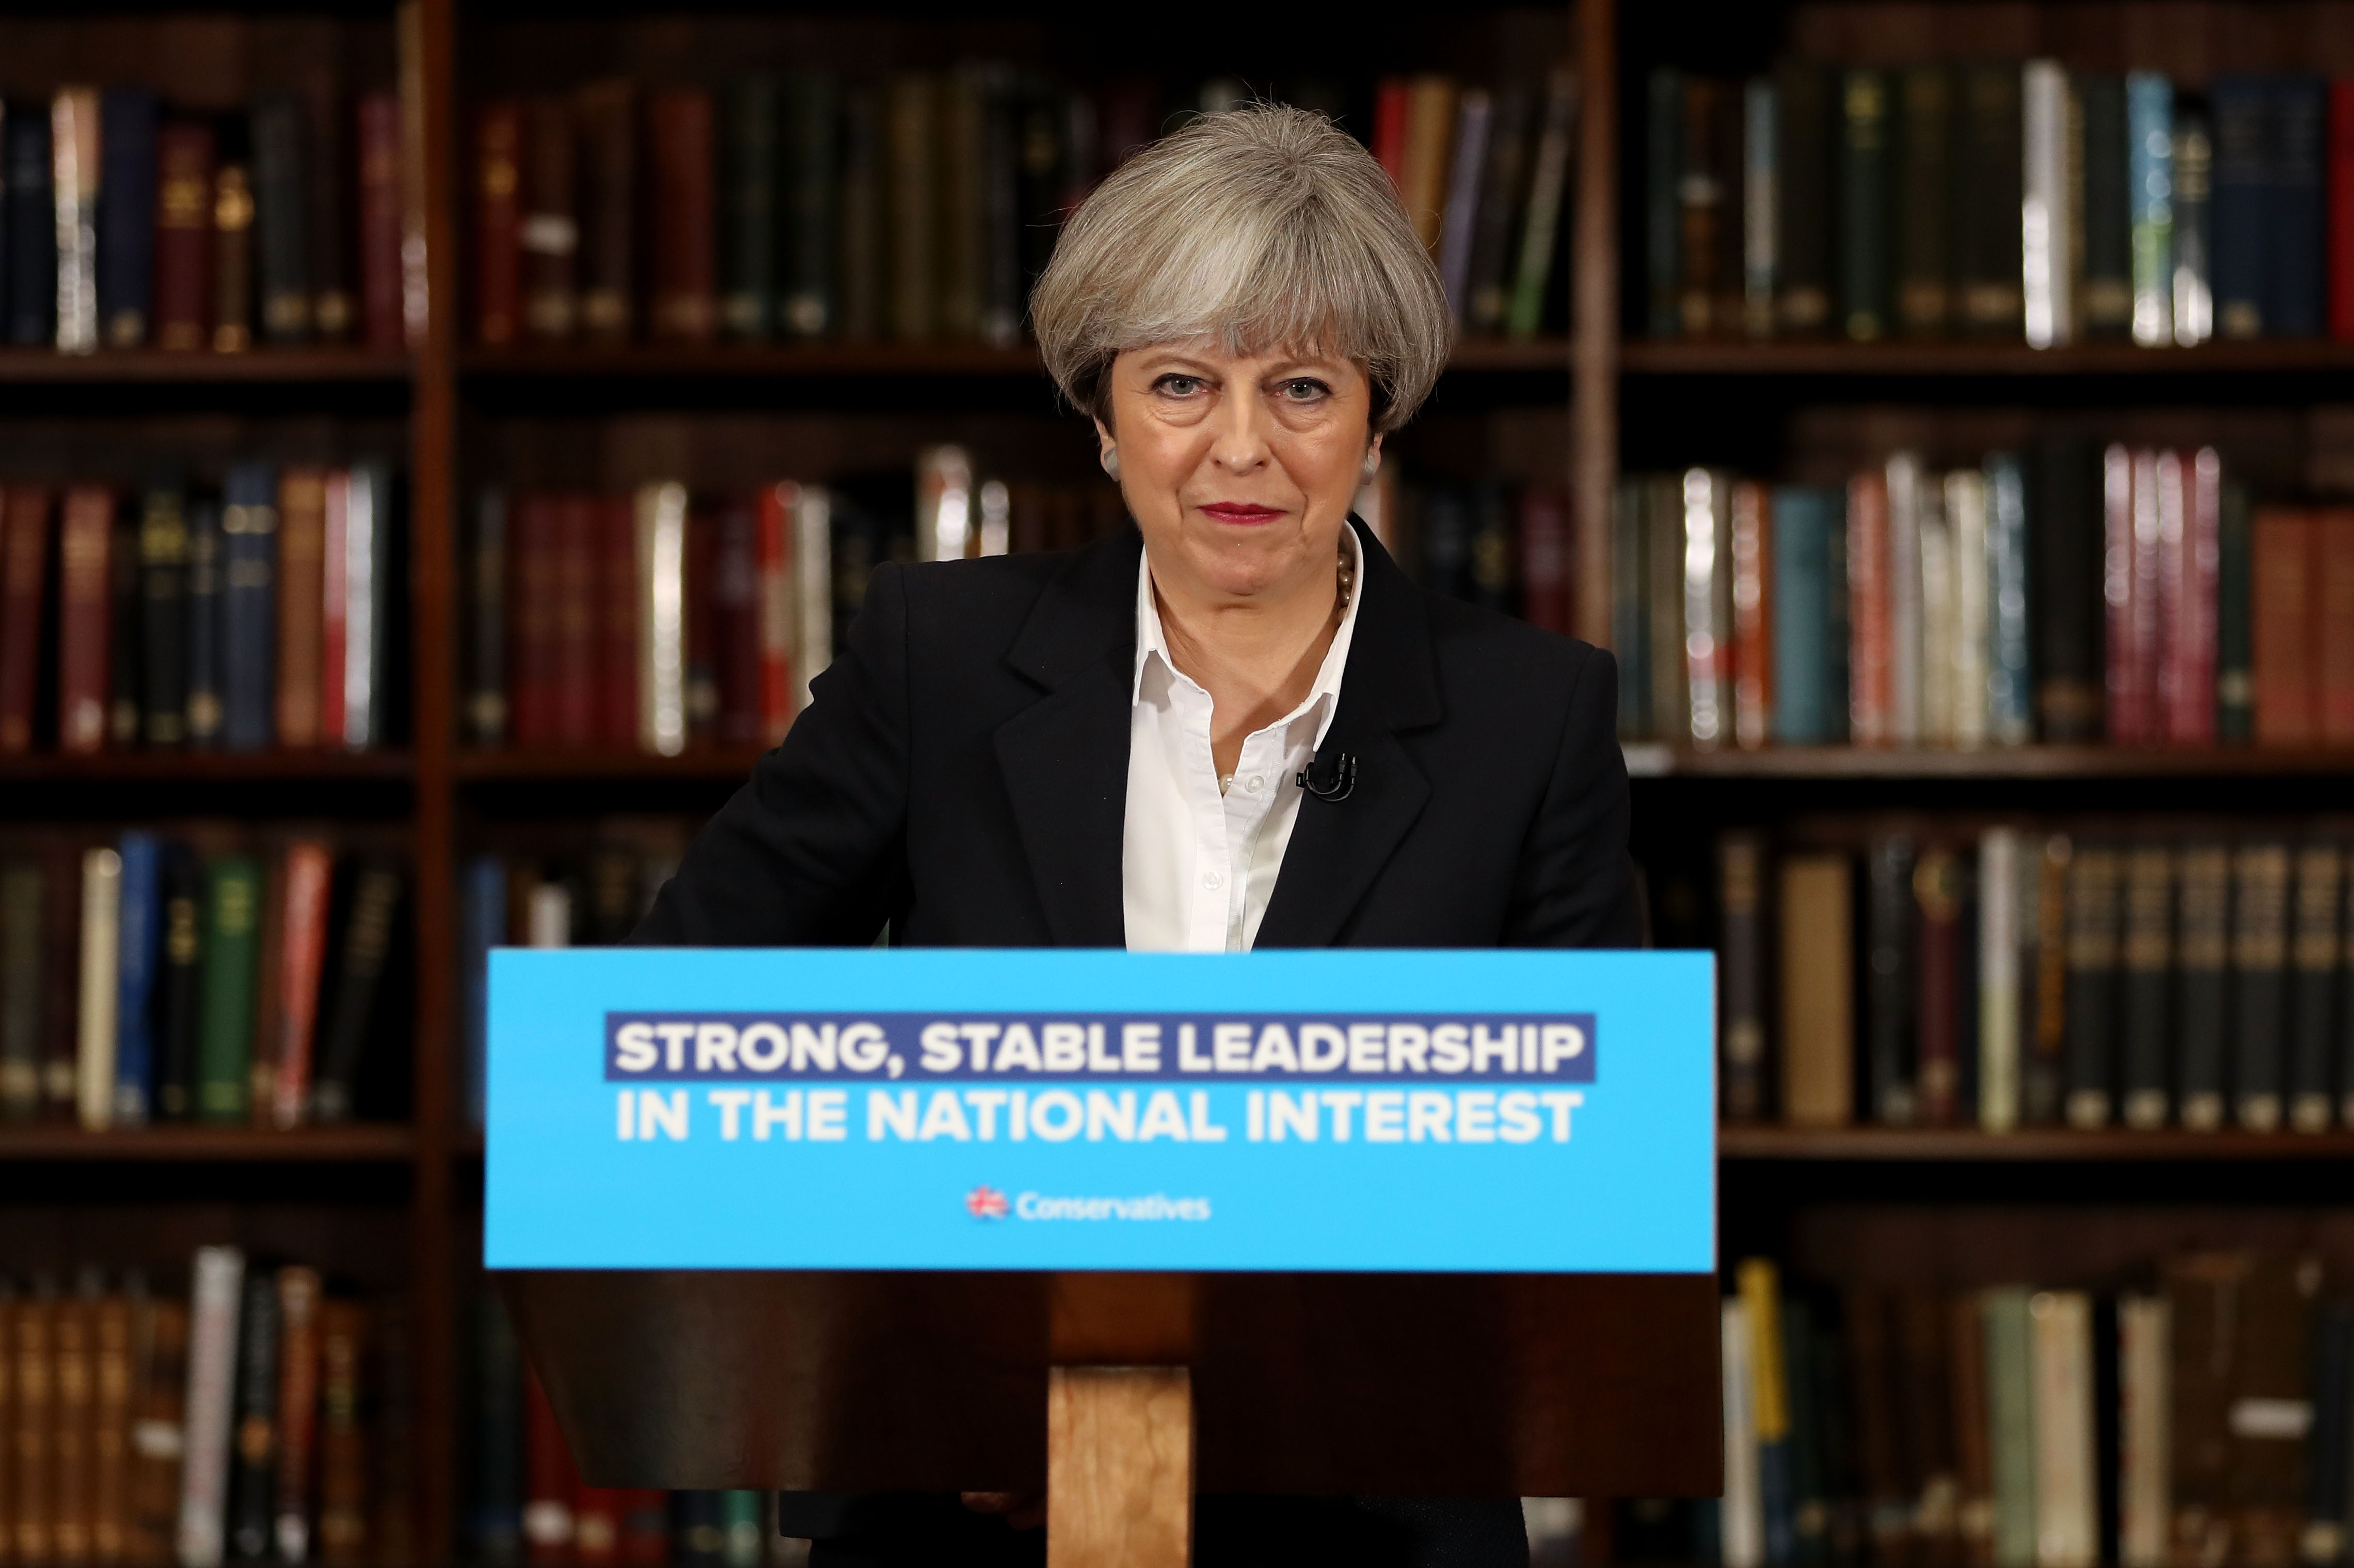 British Prime Minister, Theresa May speaks at RUSI as she resumes the Conservative party election campaign on June 5, 2017 in London, England. (Dan Kitwood—Getty Images)